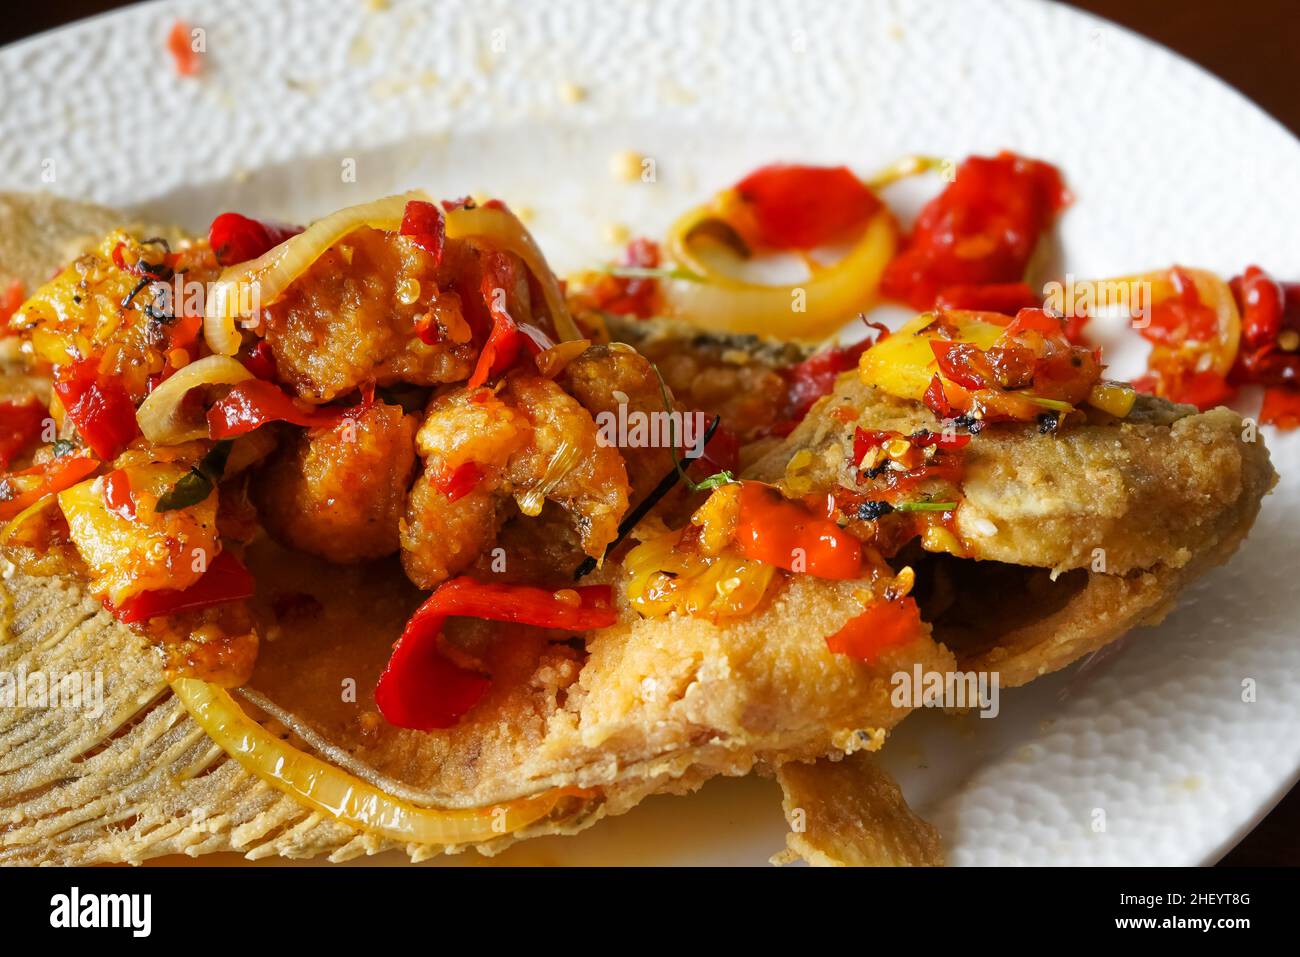 Spicy sweet and sour carp on a white plate which is one of the menu offerings from a seafood restaurant. Stock Photo